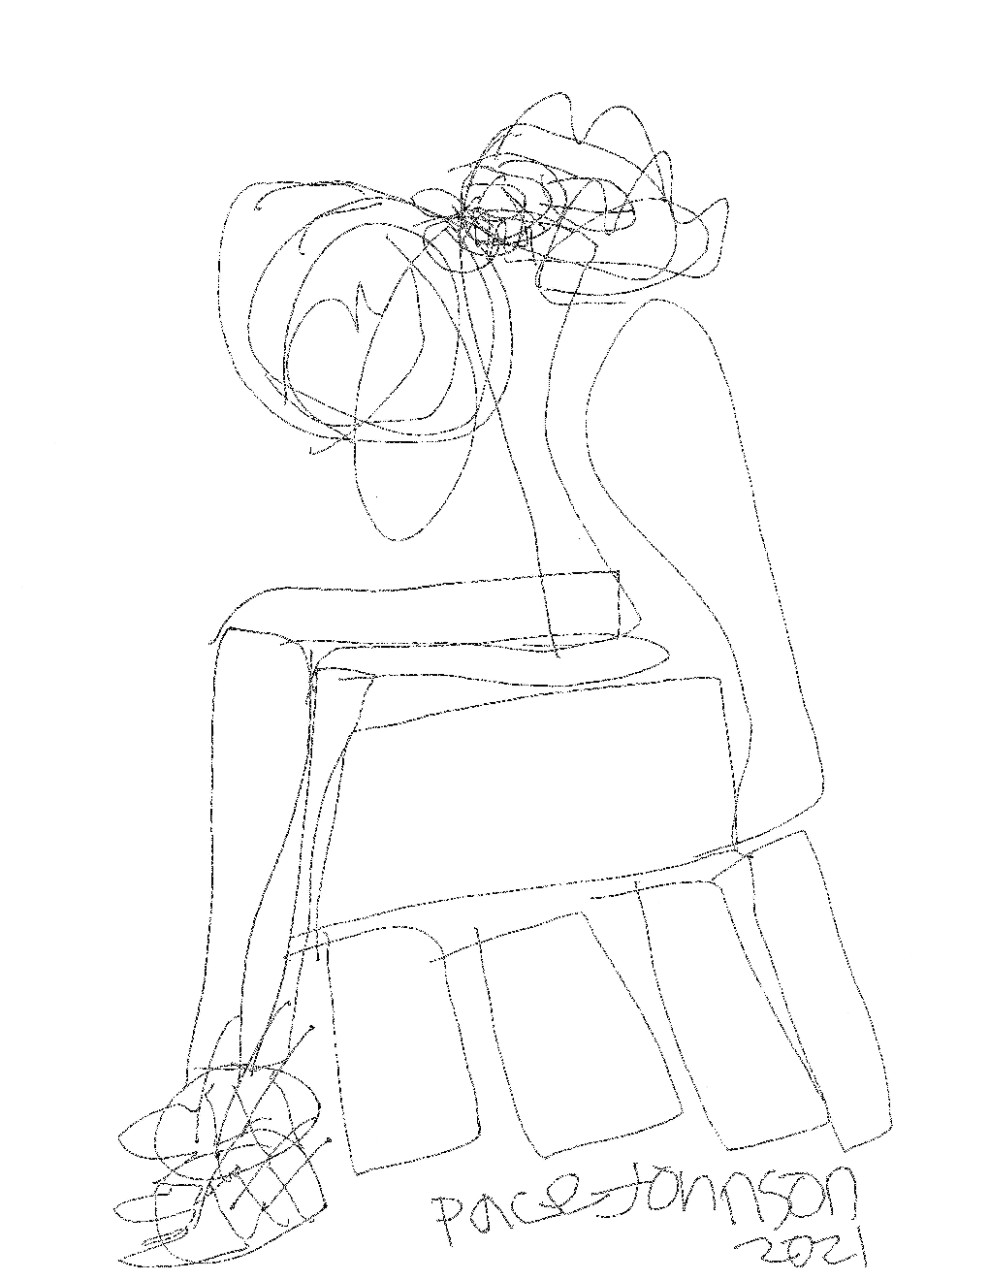 a pencil drawing on white paper of a seated man in a chair. The lines are drawn with a bit of chaos, suggesting movement – the head and the ice cream cone are just spirals and squiggles.